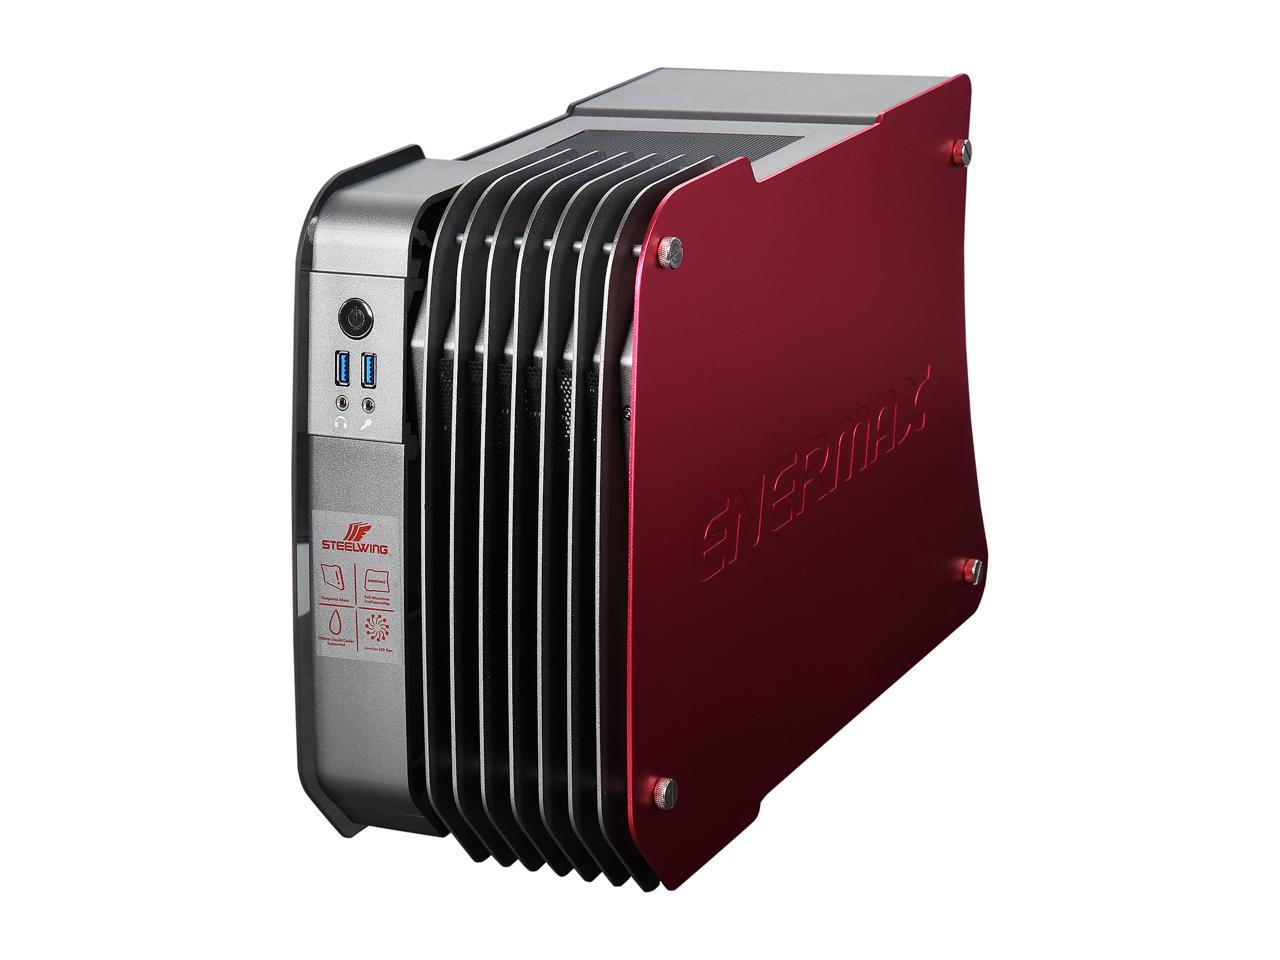 ENERMAX ECB2010R Red Aluminum / Tempered Glass Micro ATX / Mini-ITX Computer Case Standard SFX Type Power Supply-Red - image 3 of 3